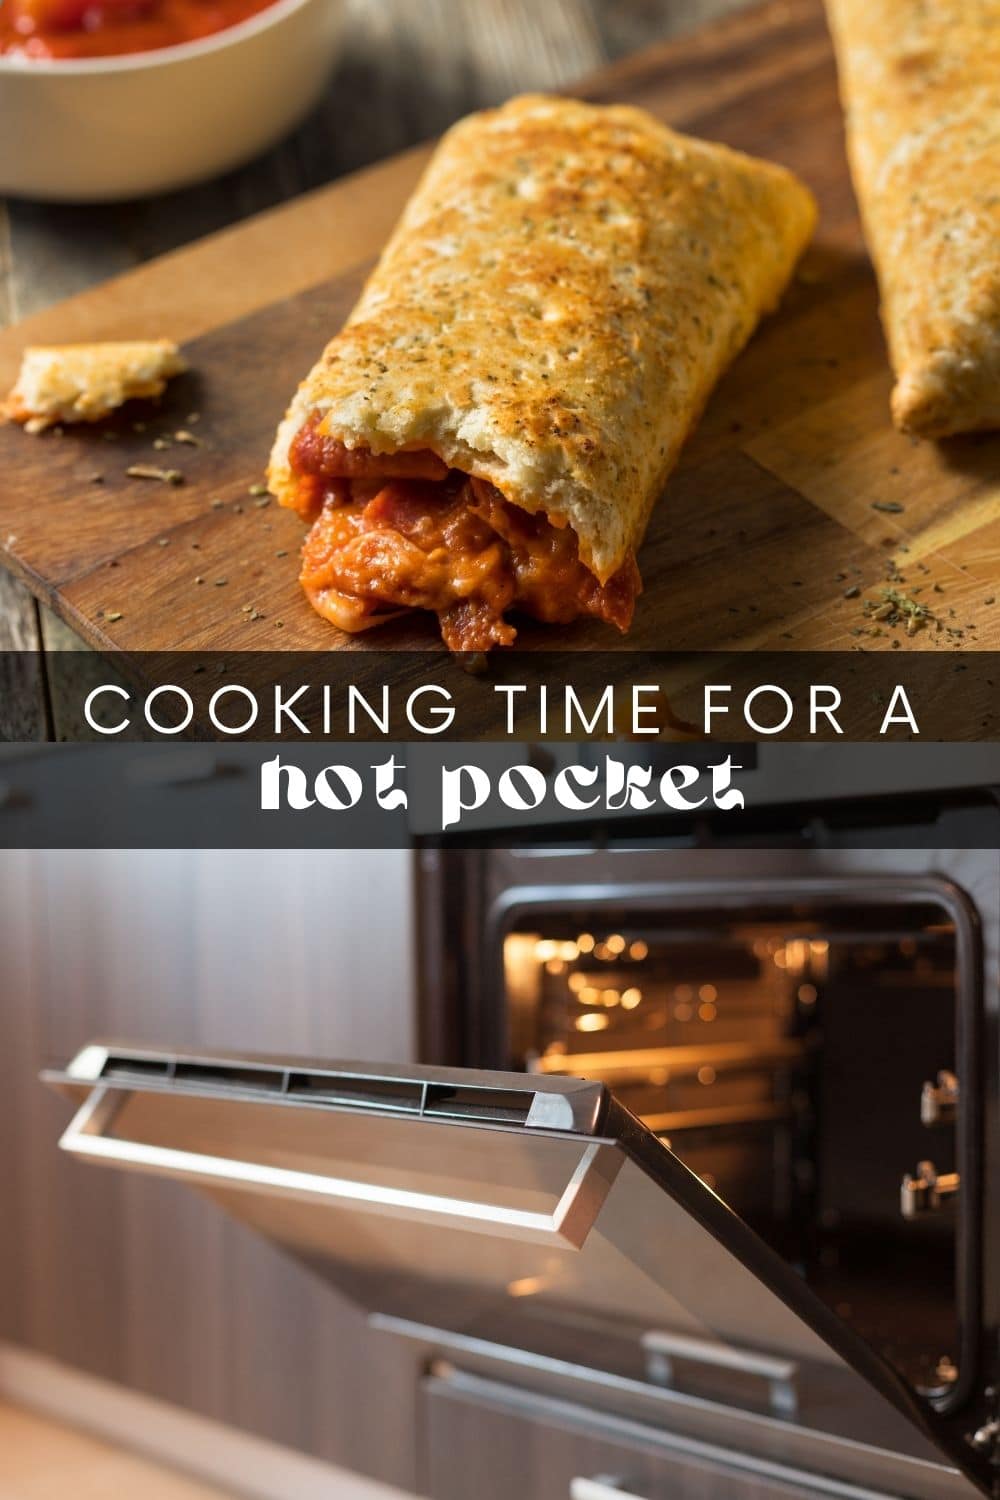 Discover the best hot pocket cook time for the microwave, air fryer, and oven! No more cold middles, burned crusts, or uneven heating. Always enjoy a perfectly cooked hot pocket with these cooking tips!